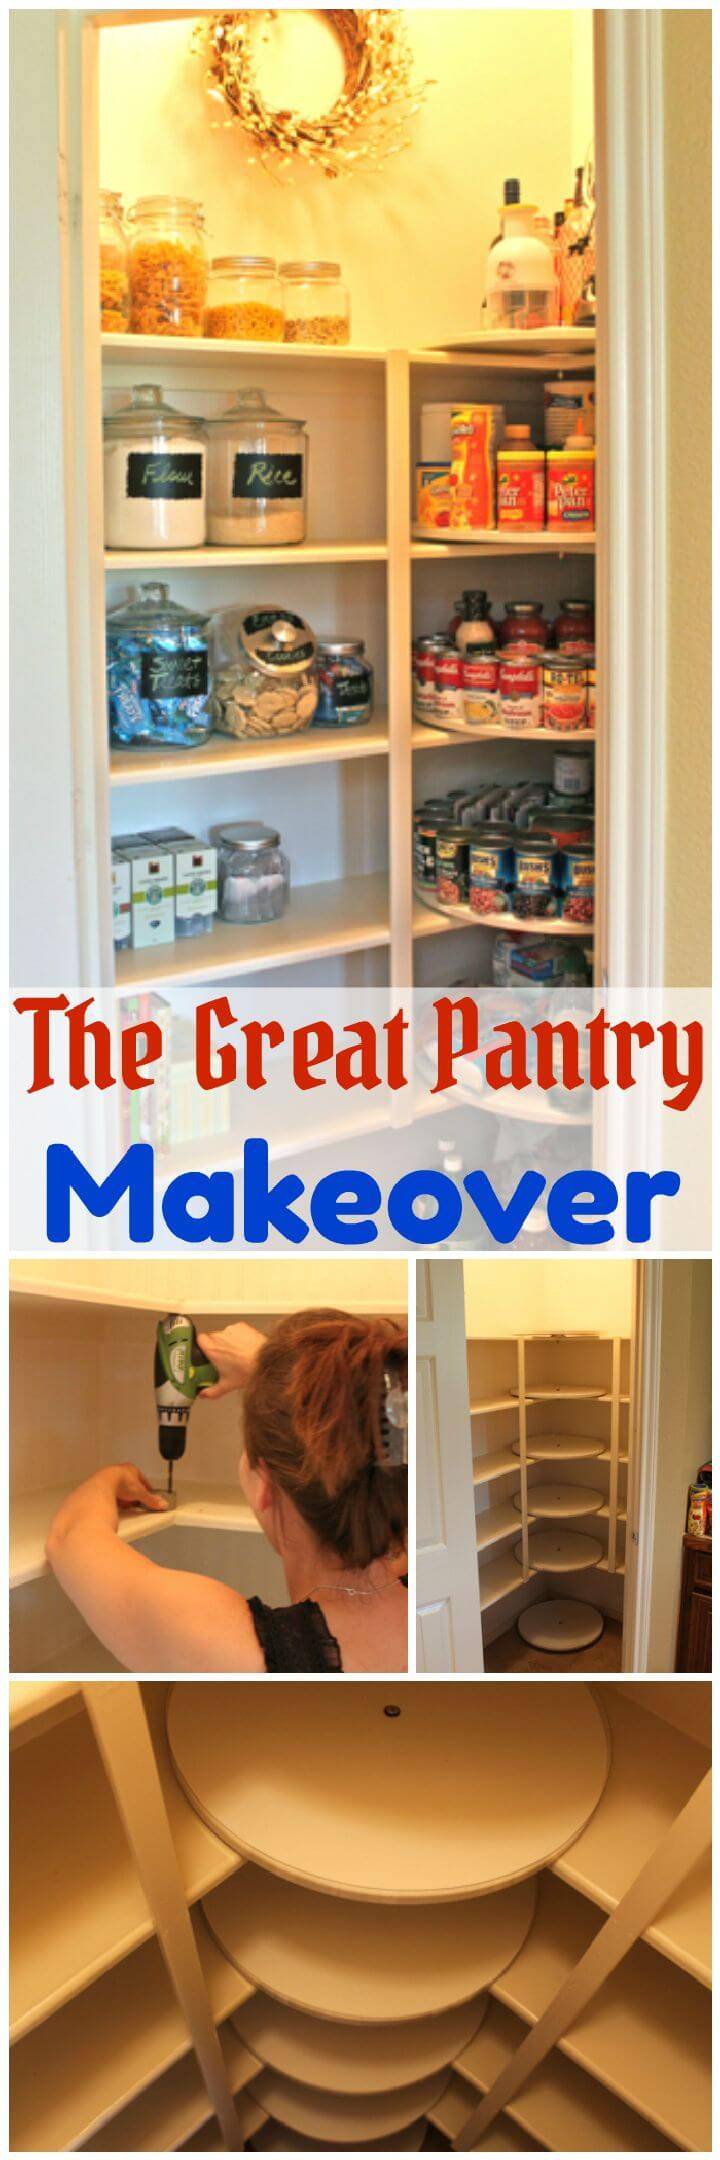 The Great Pantry Makeover